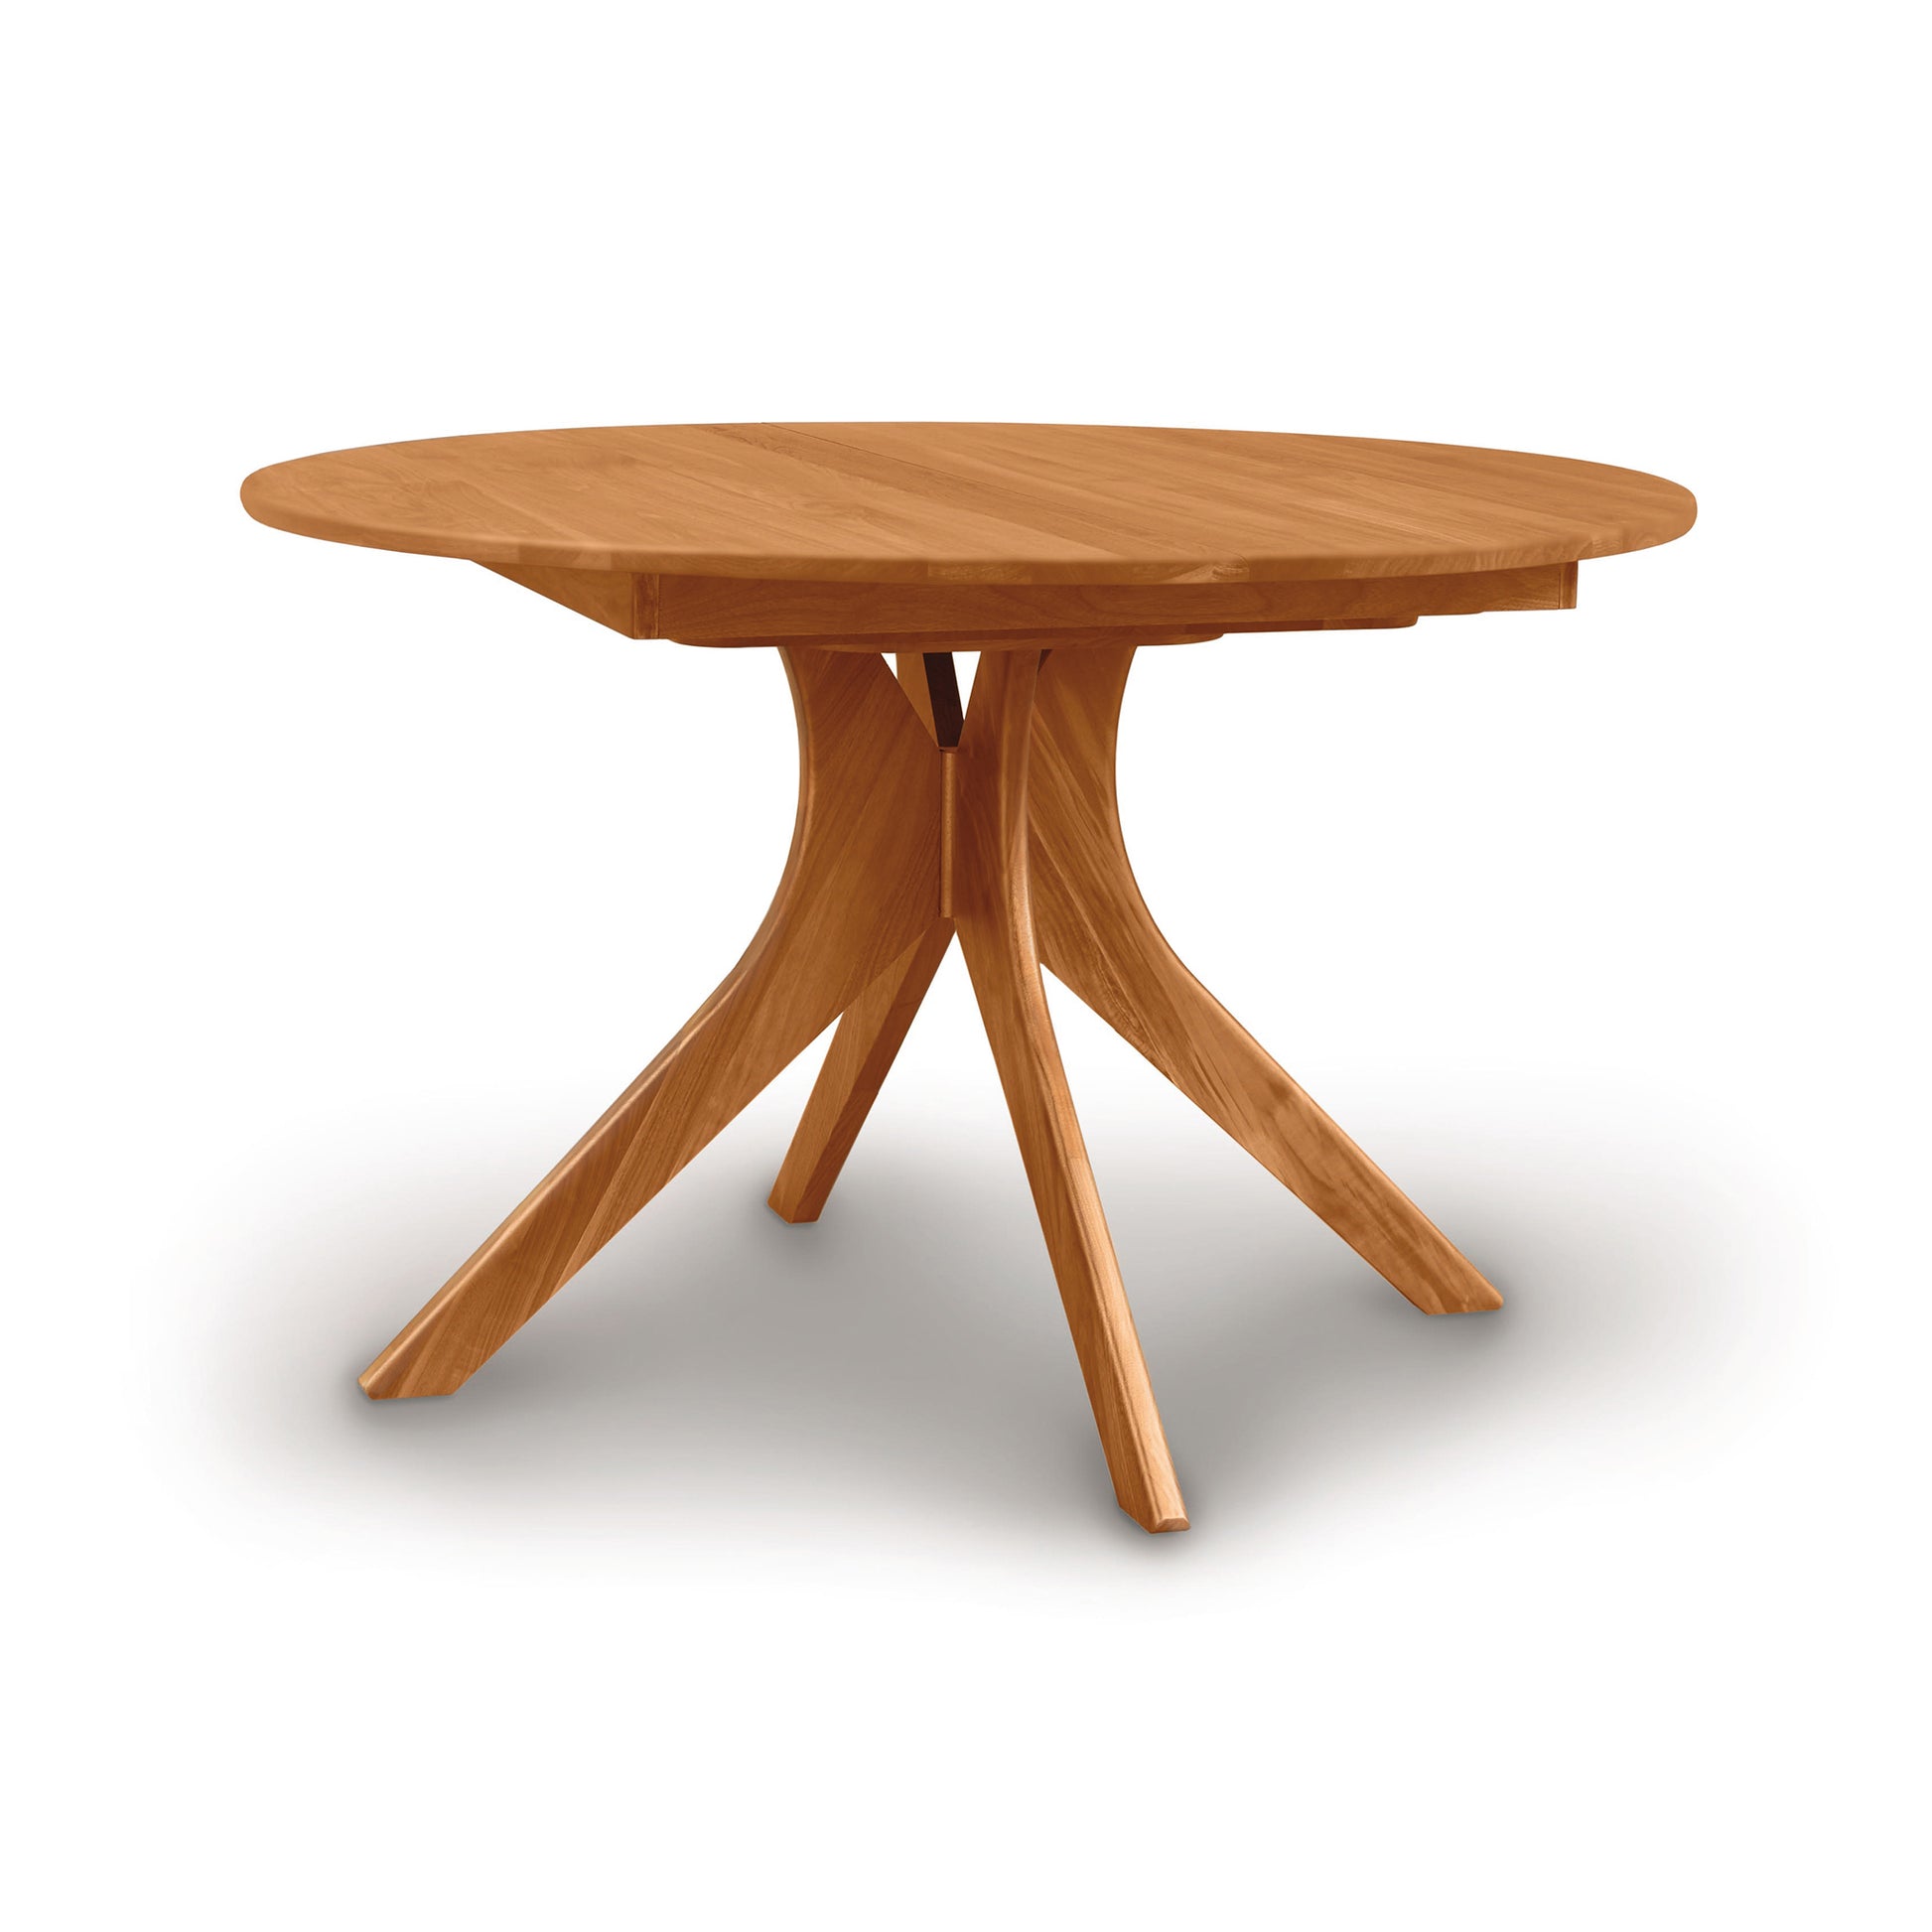 An Audrey Round Extension Dining Table by Copeland Furniture, with three legs.